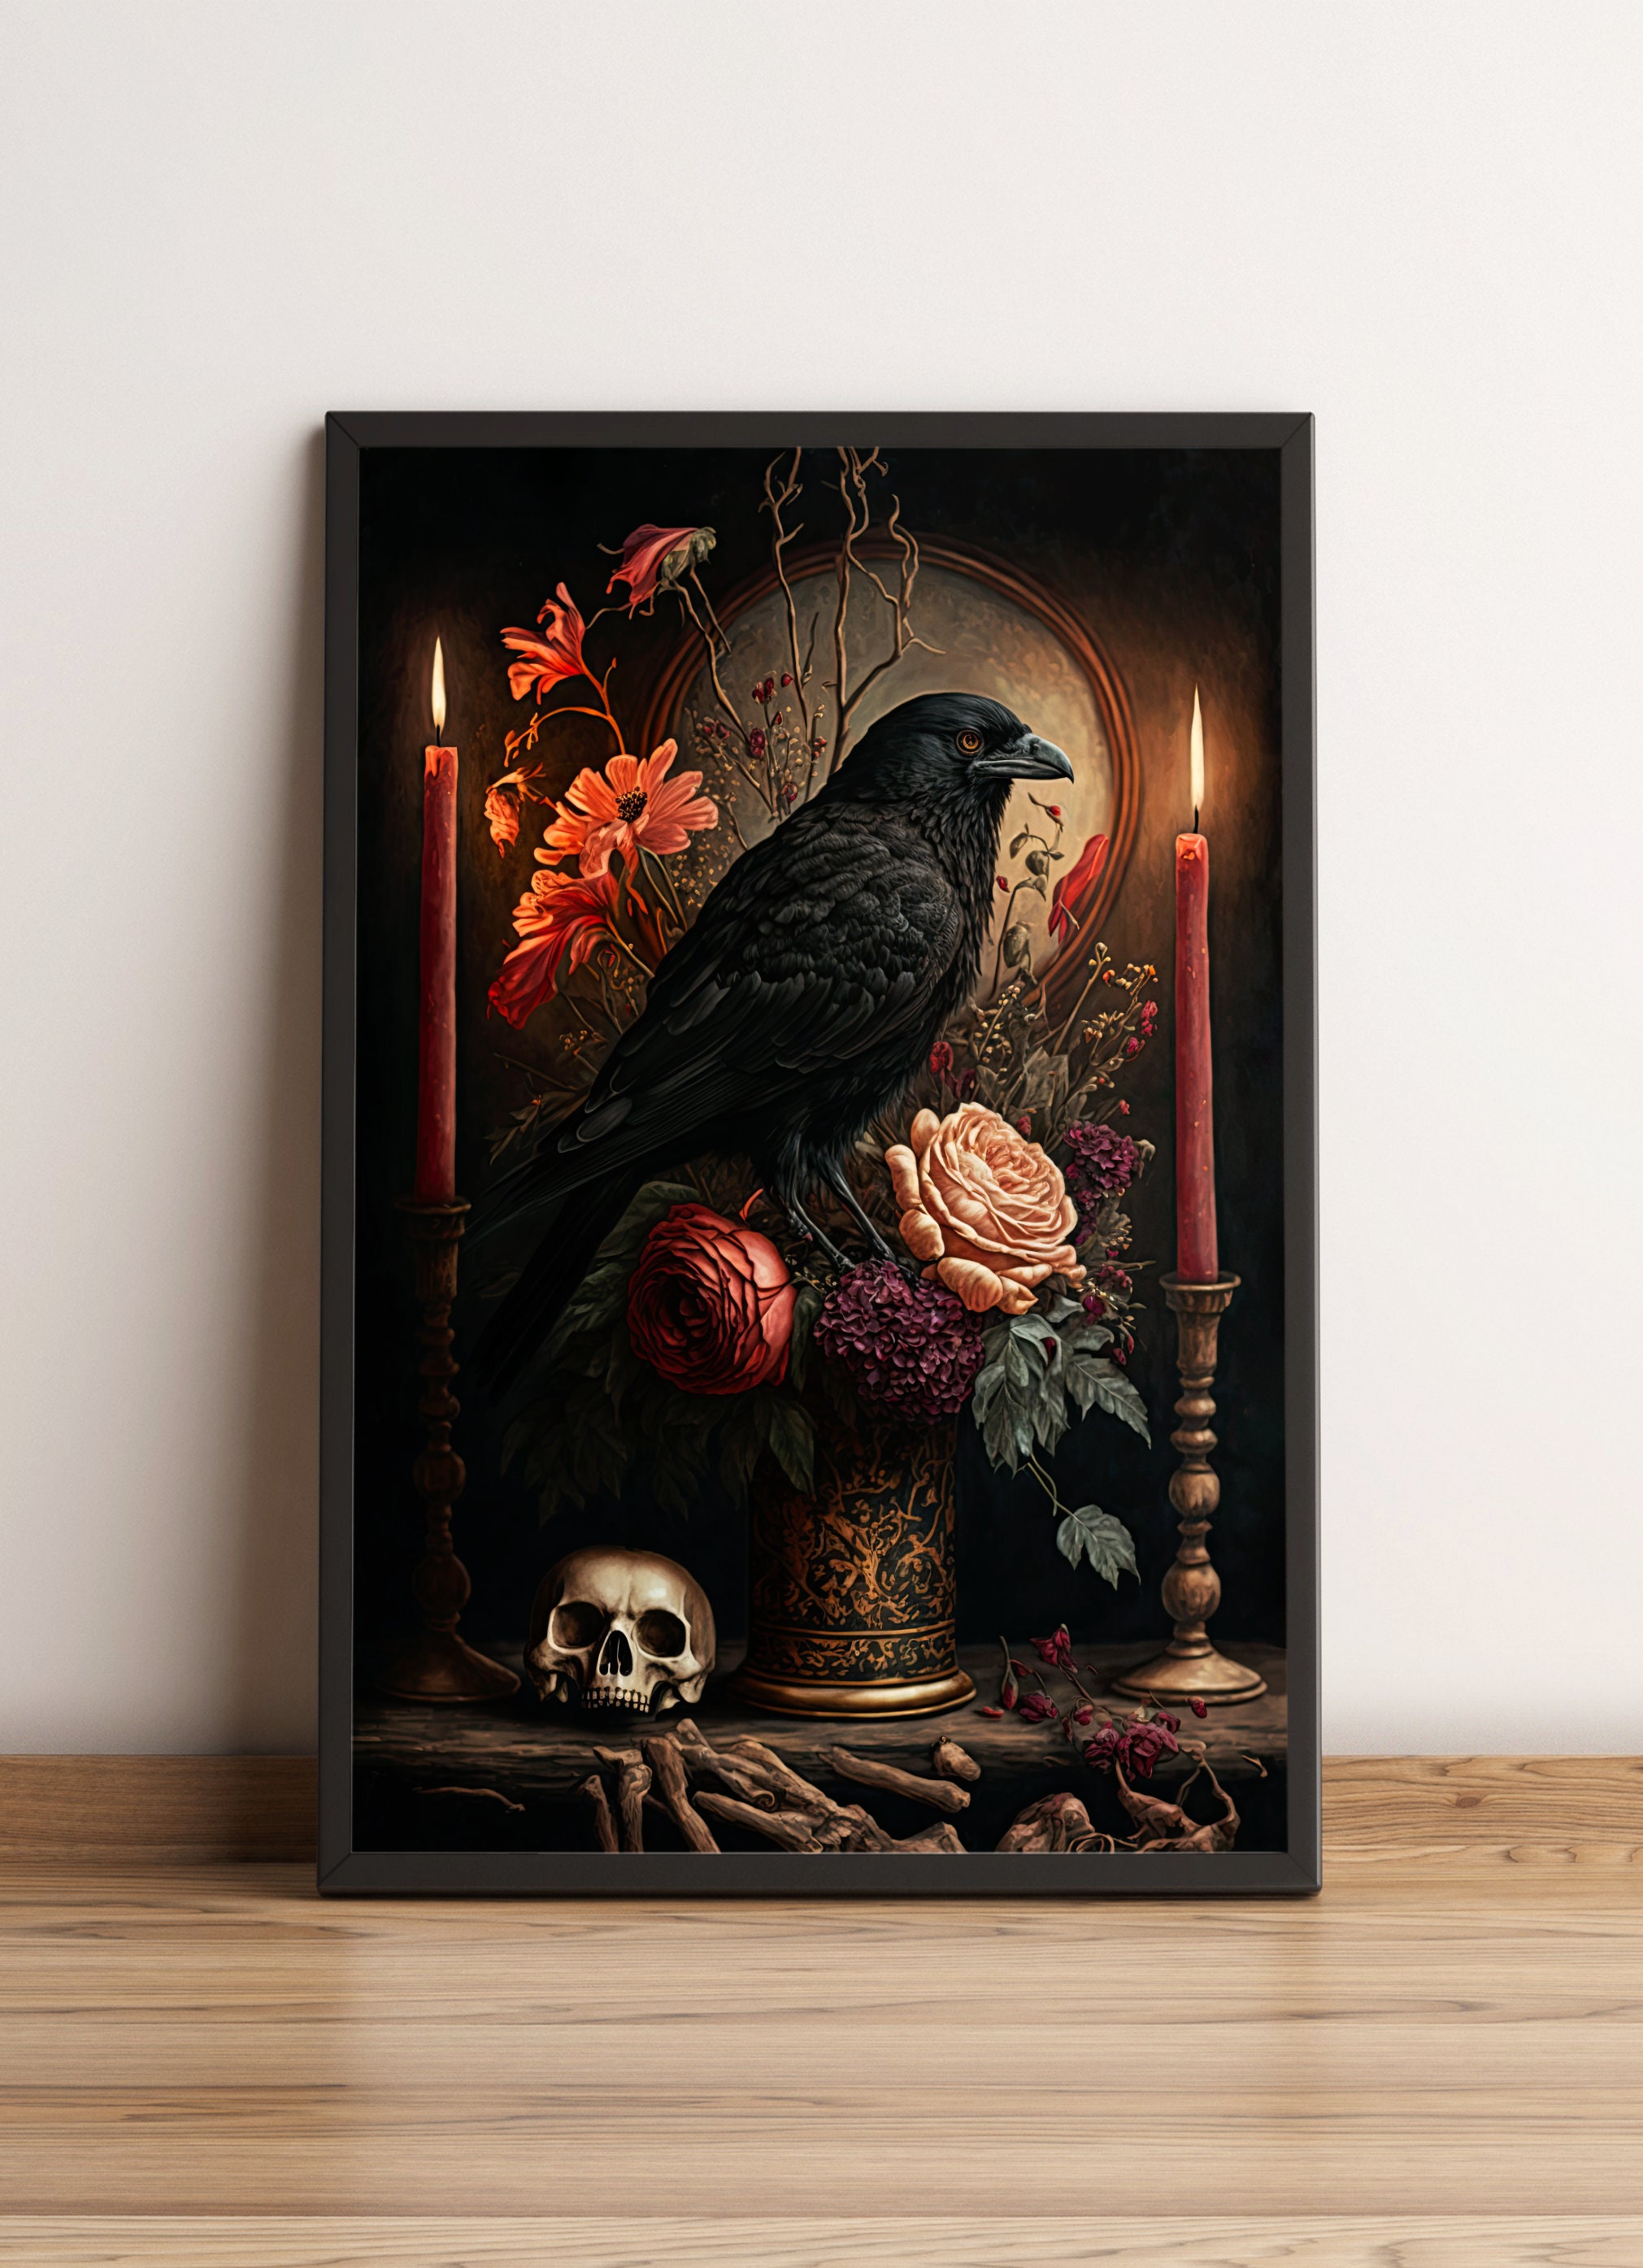 Spooky Weirdo Satanic Photo - Gothic Goth Wall Art - Whimsigothic Witch  Poster Print - Skull Ghost Raven Crow Pagan Gifts - Haunted House Halloween